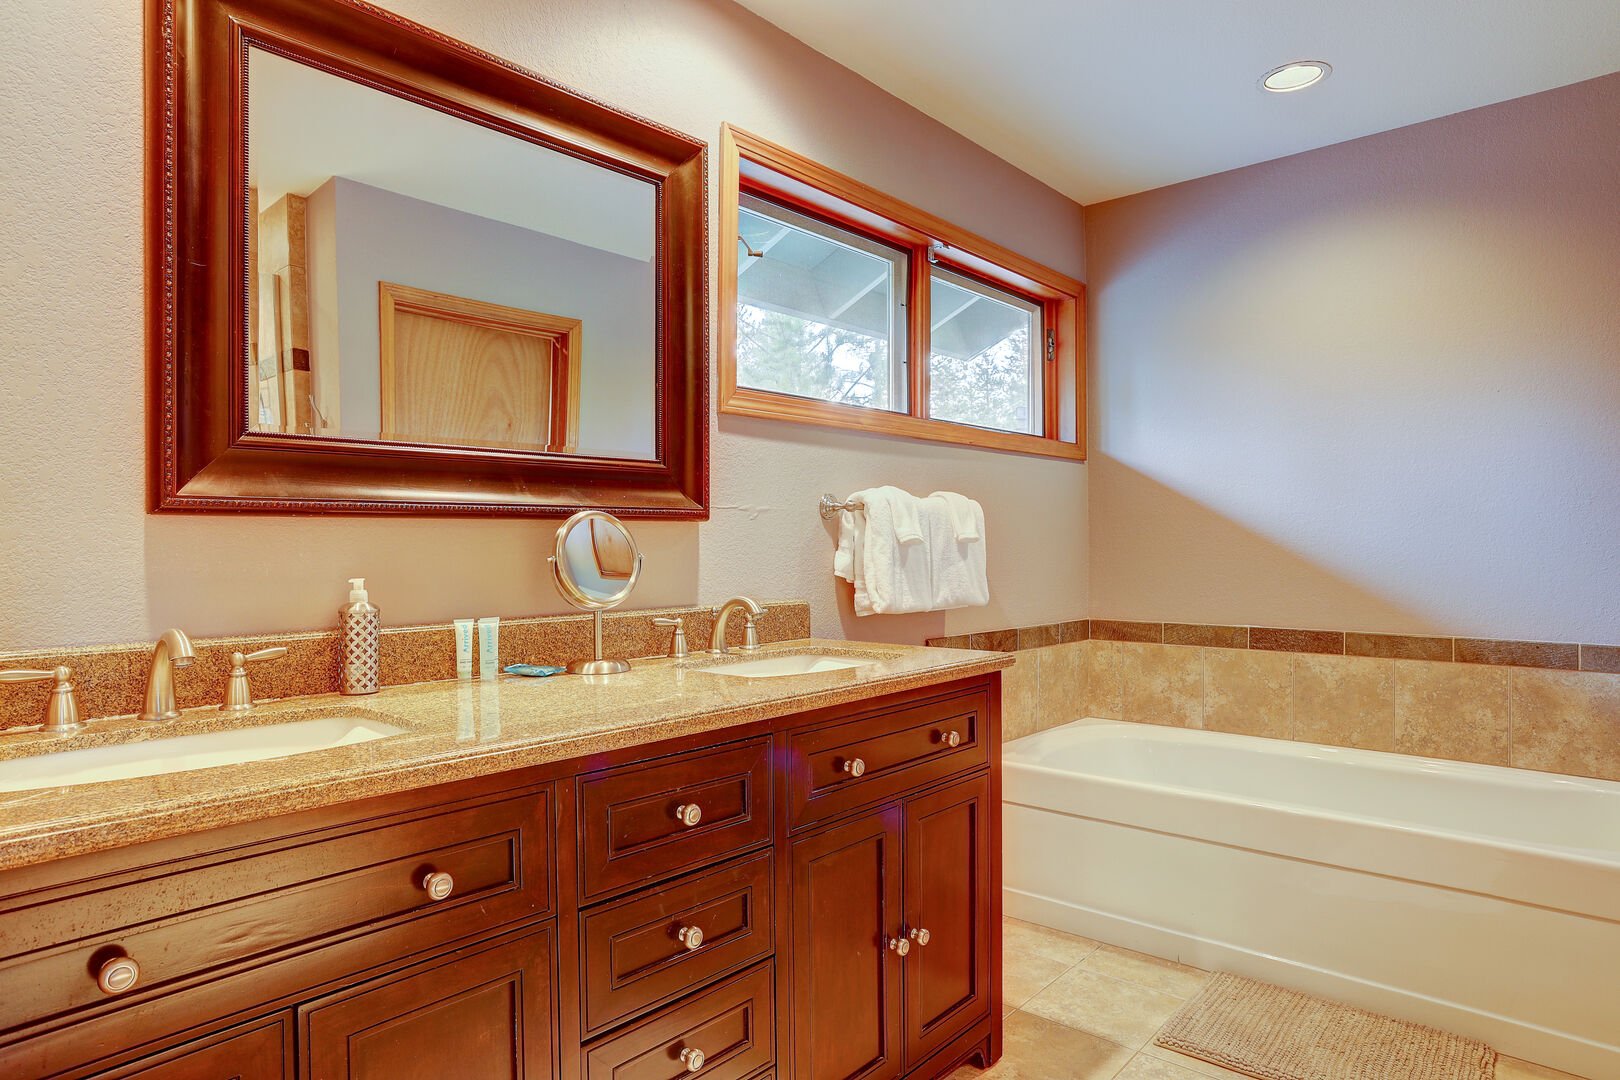 Master bath has twin sinks, extra long bathtub, separate shower and private toilet room.